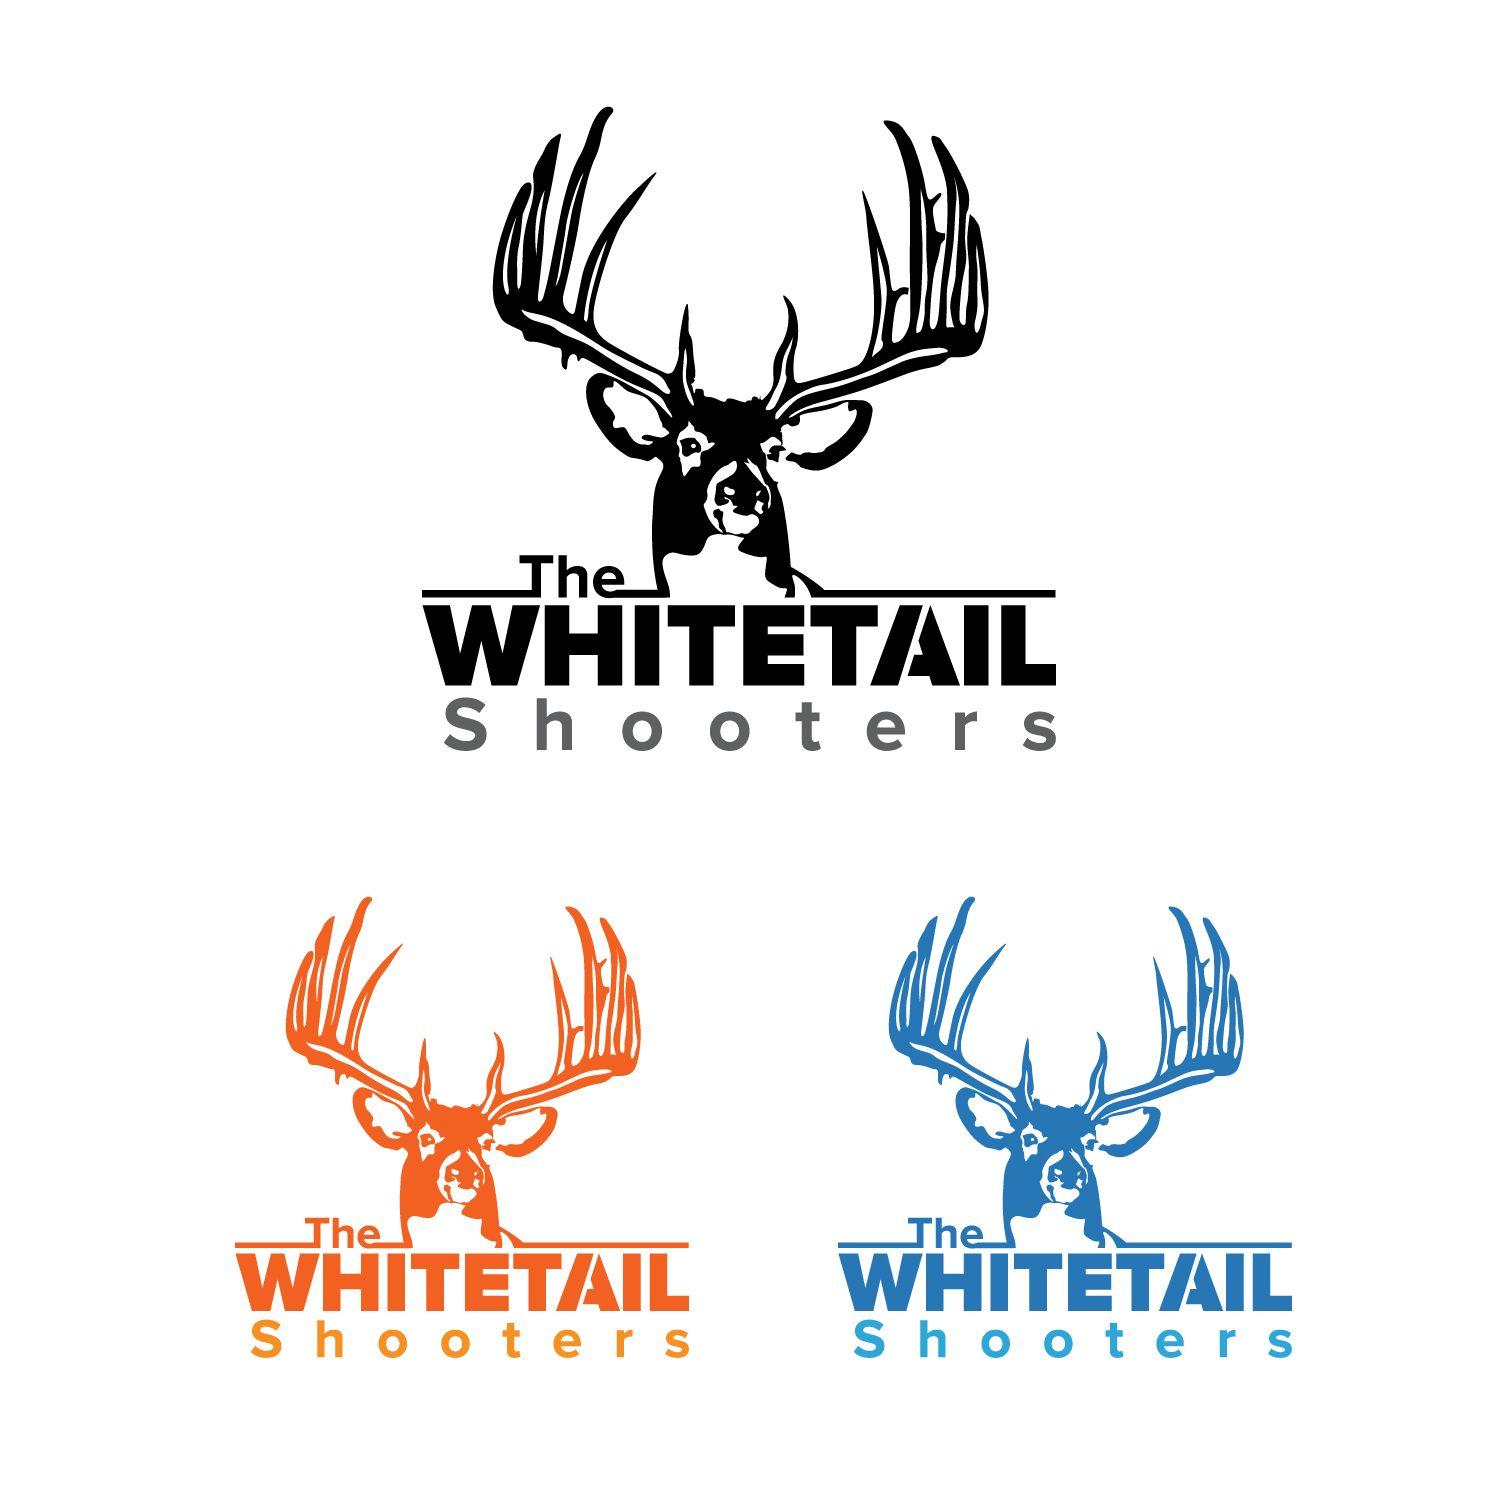 Whitetail Logo - Logo design for specialty interest group | 55 Logo Designs for The ...